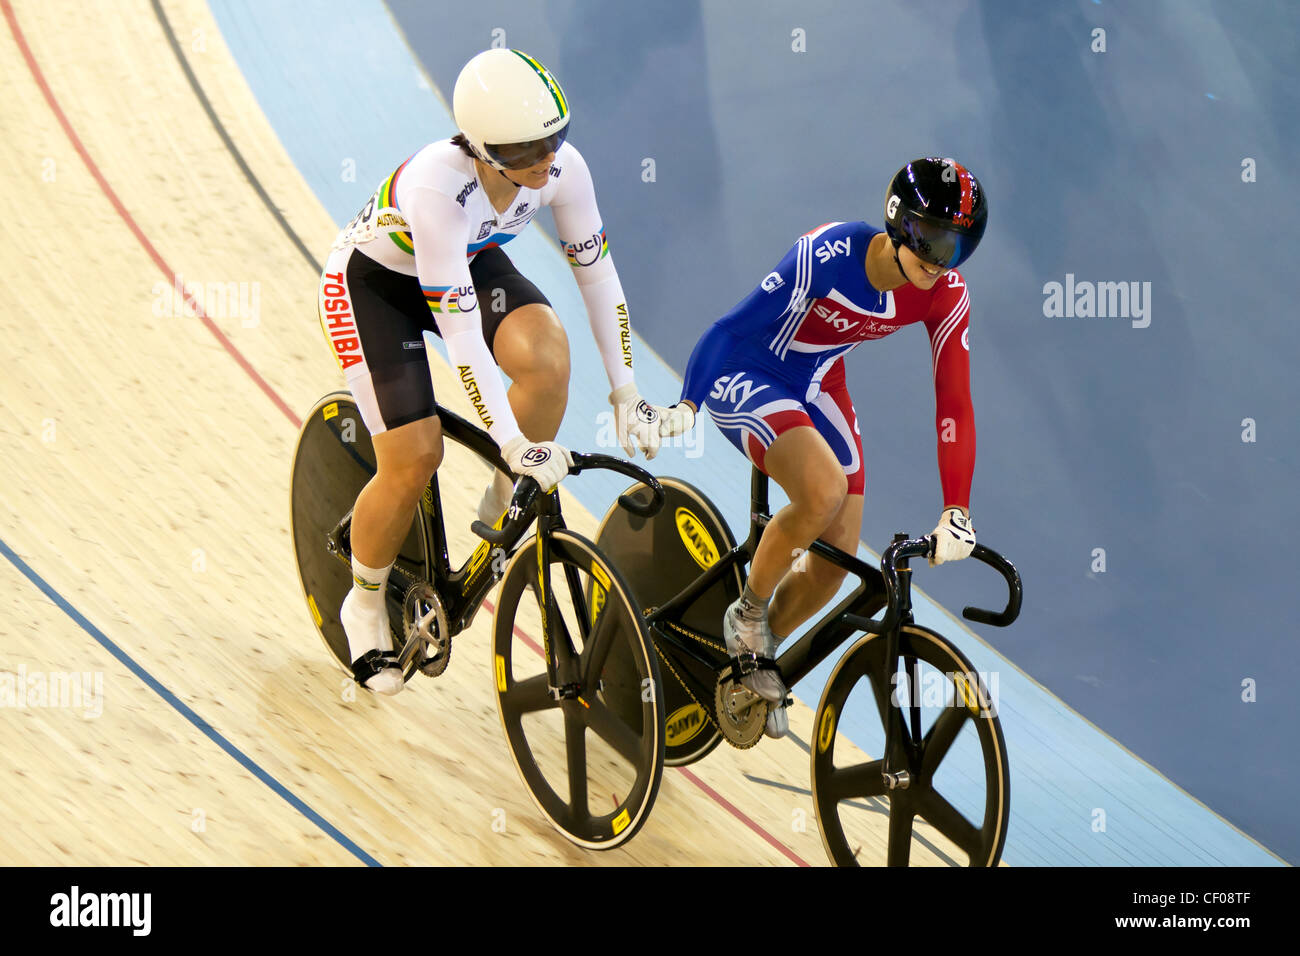 Victoria PENDLETON & Anna MEARES Women's Sprint Semifinals UCI Track Cycling World Cup 2012 Stock Photo